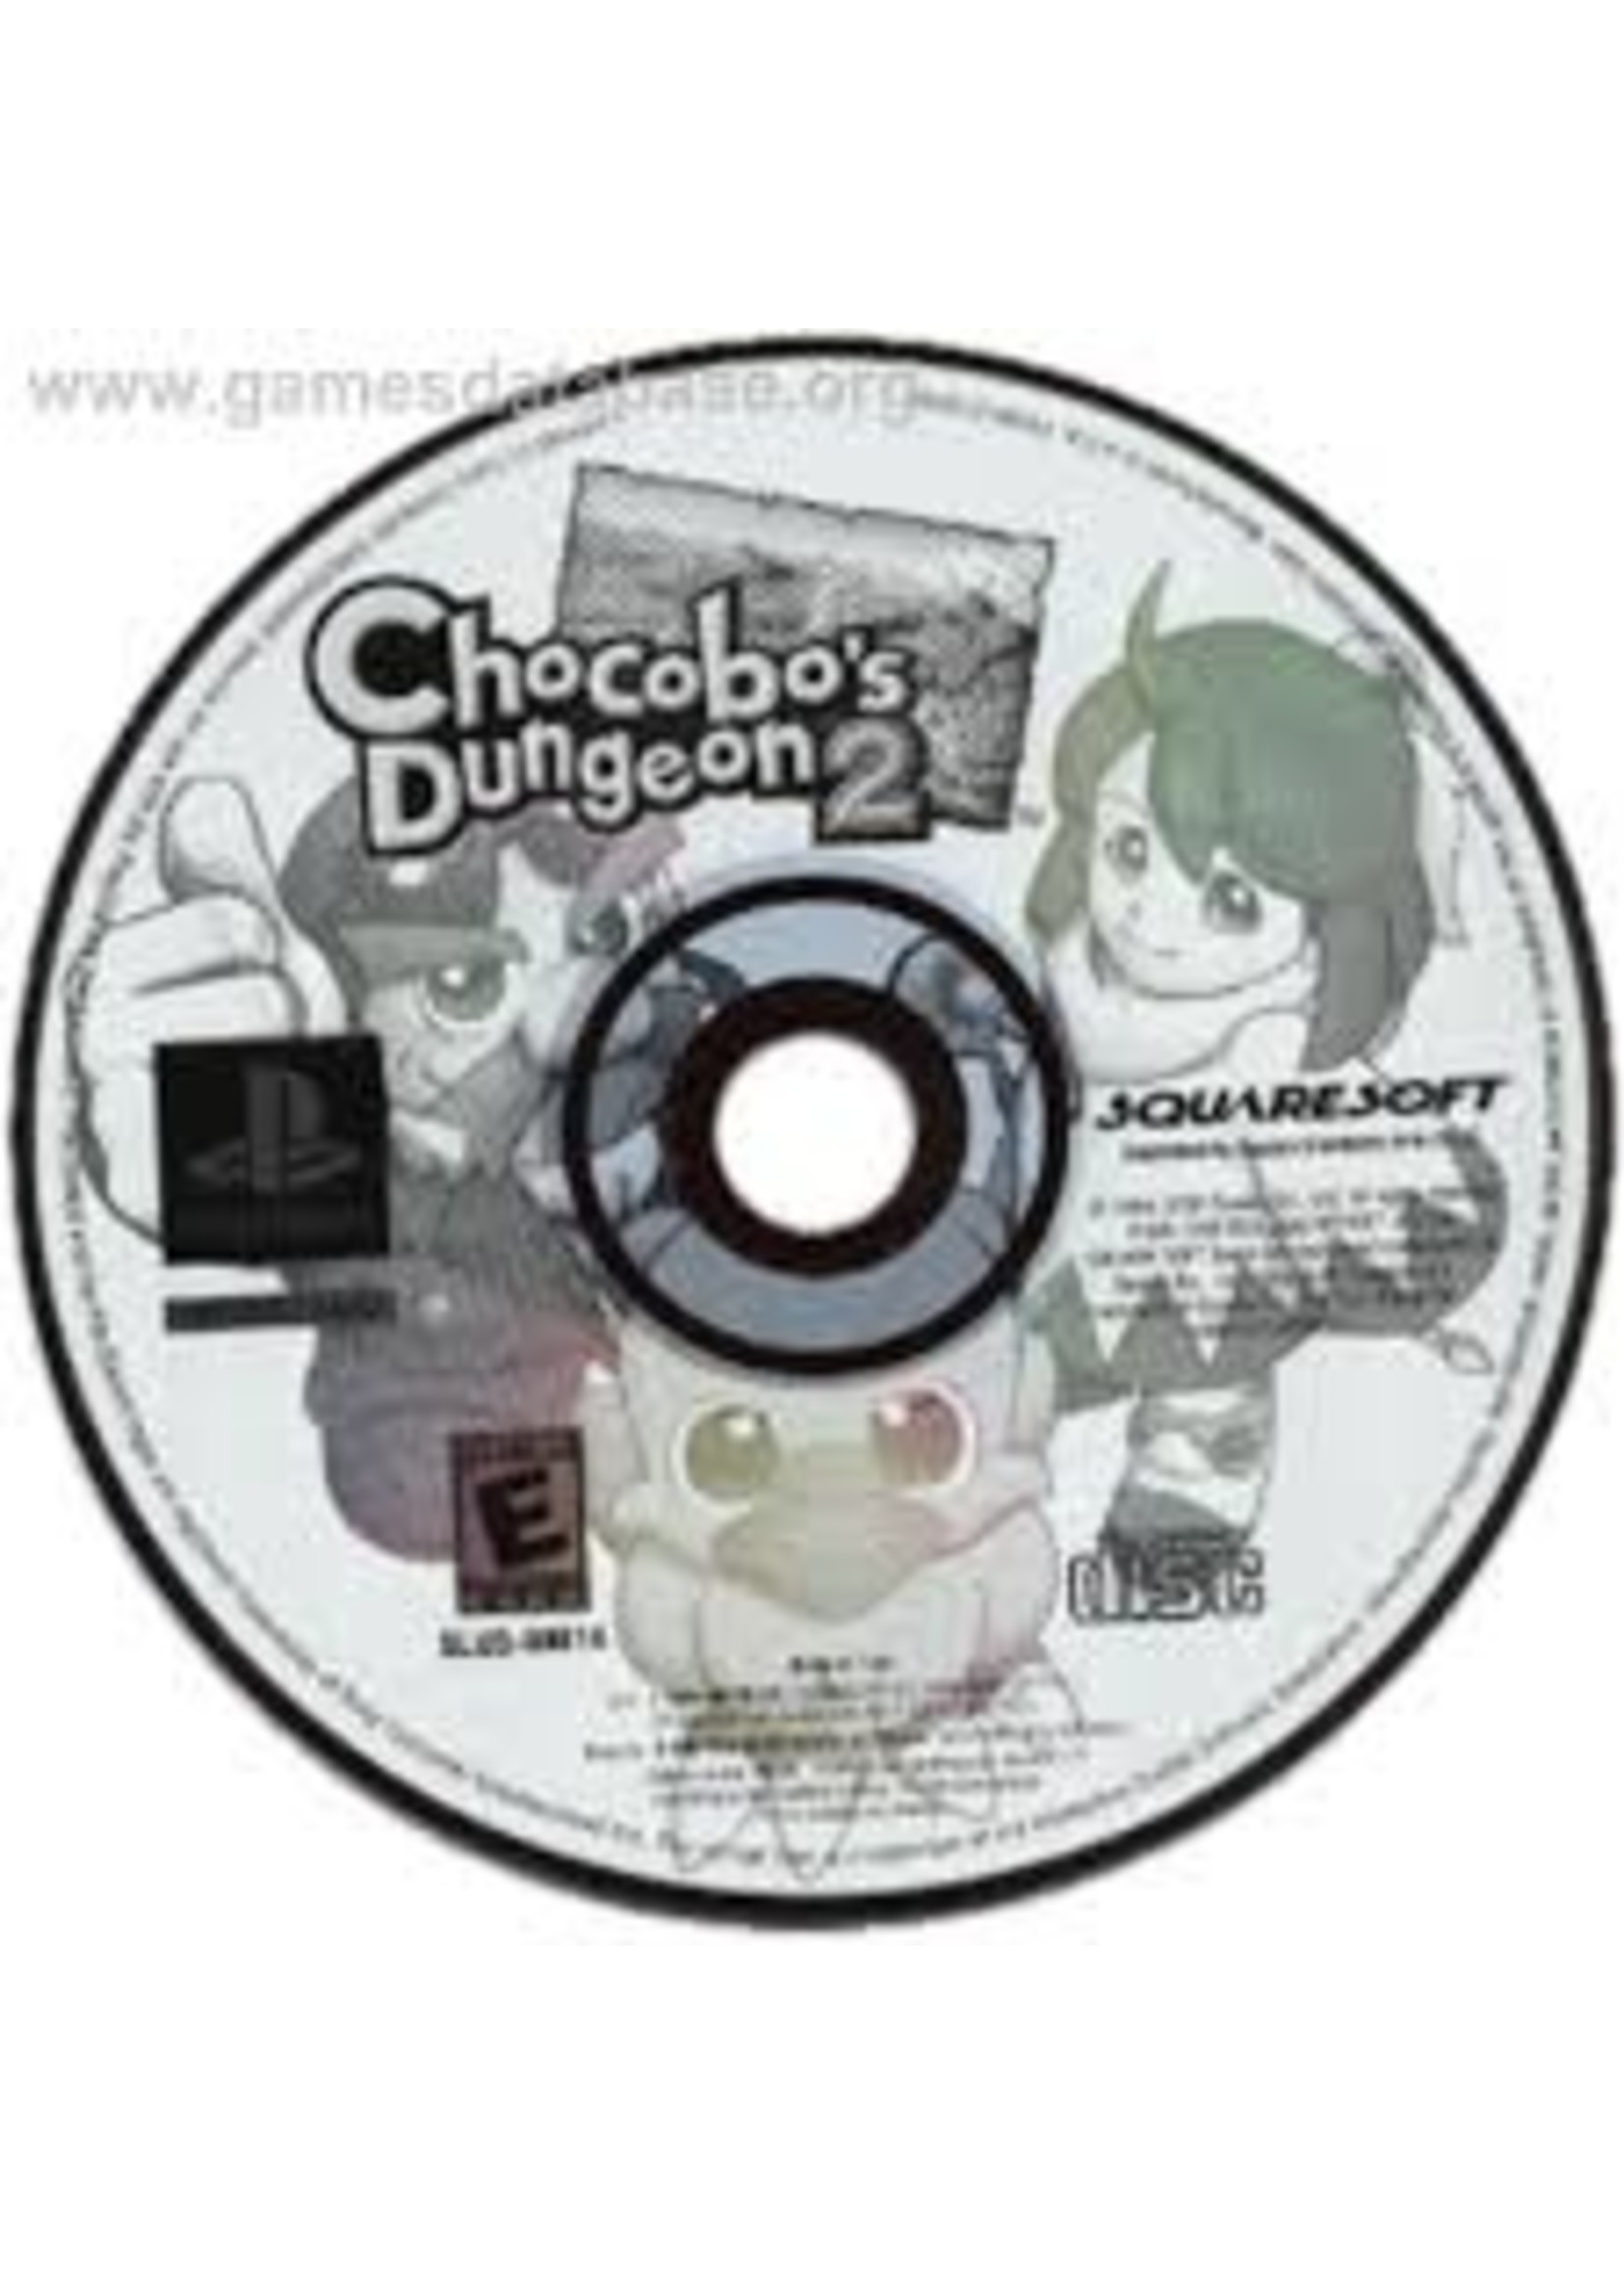 Sony Playstation 1 (PS1) Chocobo's Dungeon 2 - Print